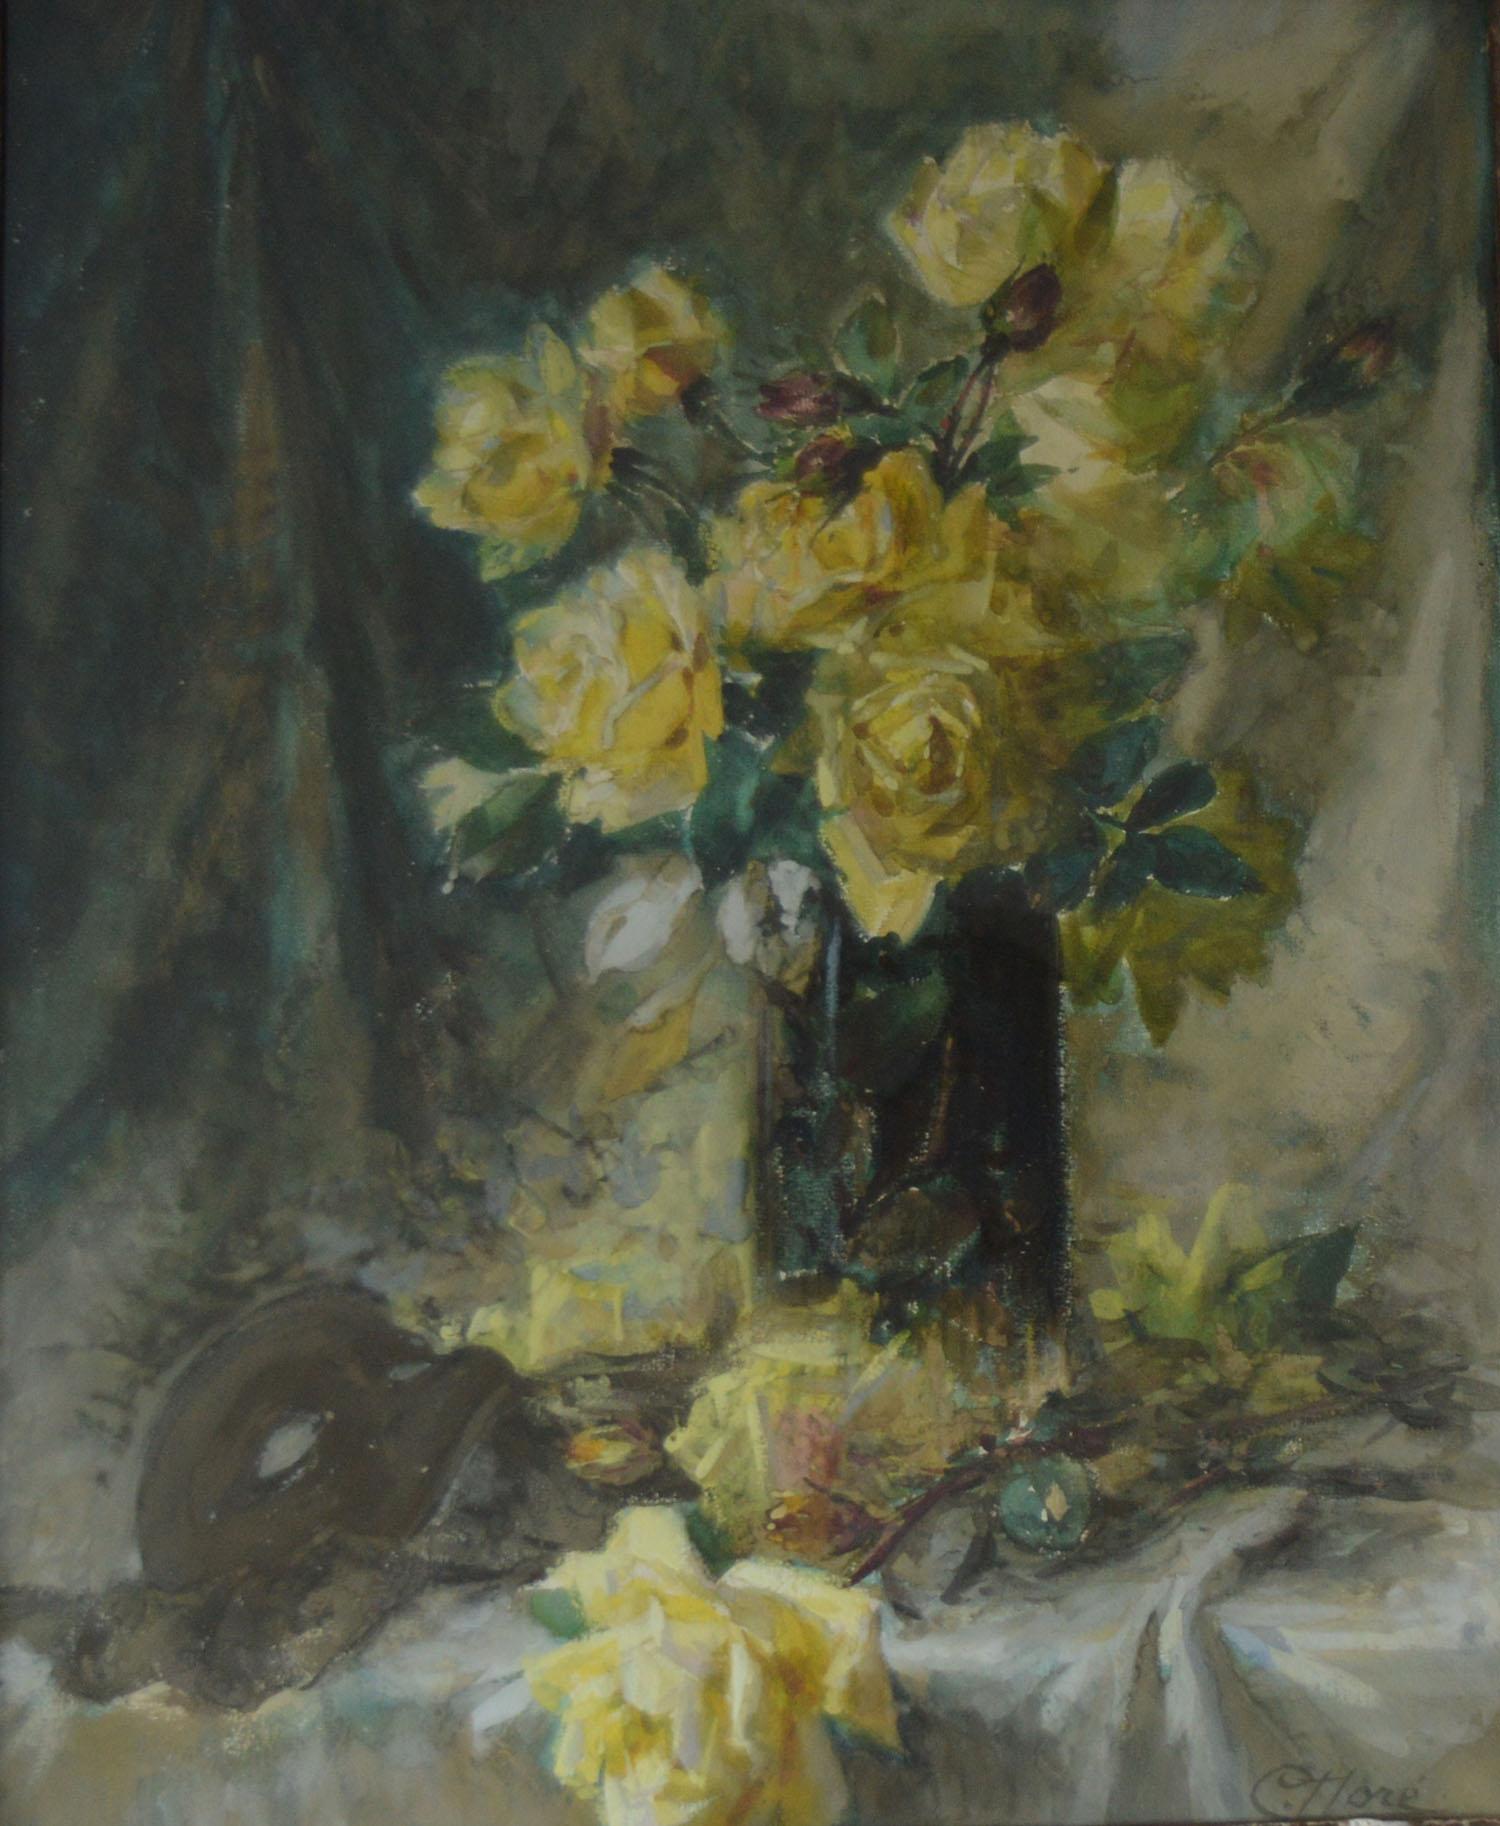 French Provincial Impressionist Painting of Yellow Roses by C. Dore, French, circa 1870